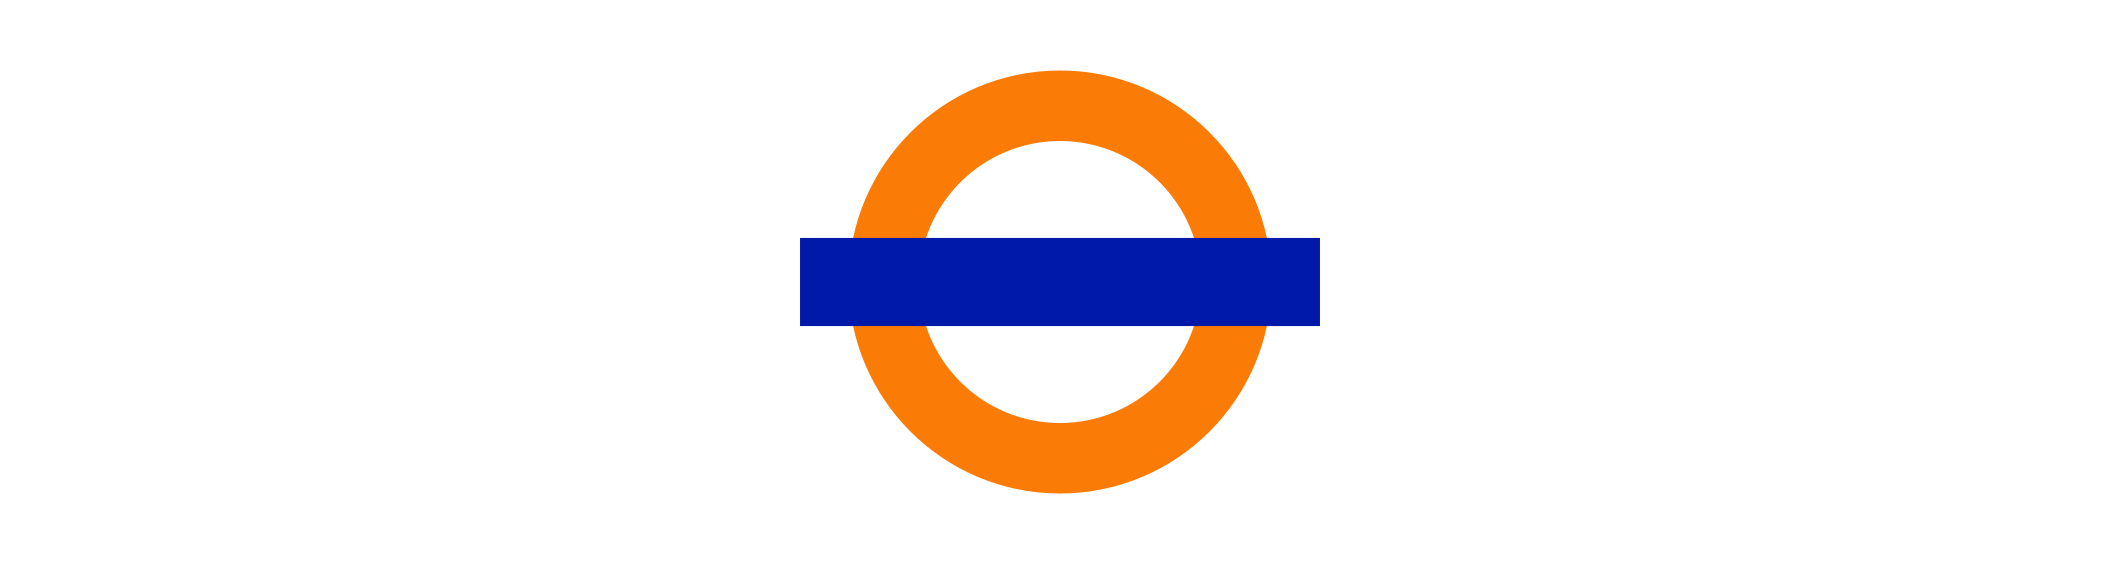 The official logo for the London Overground network.